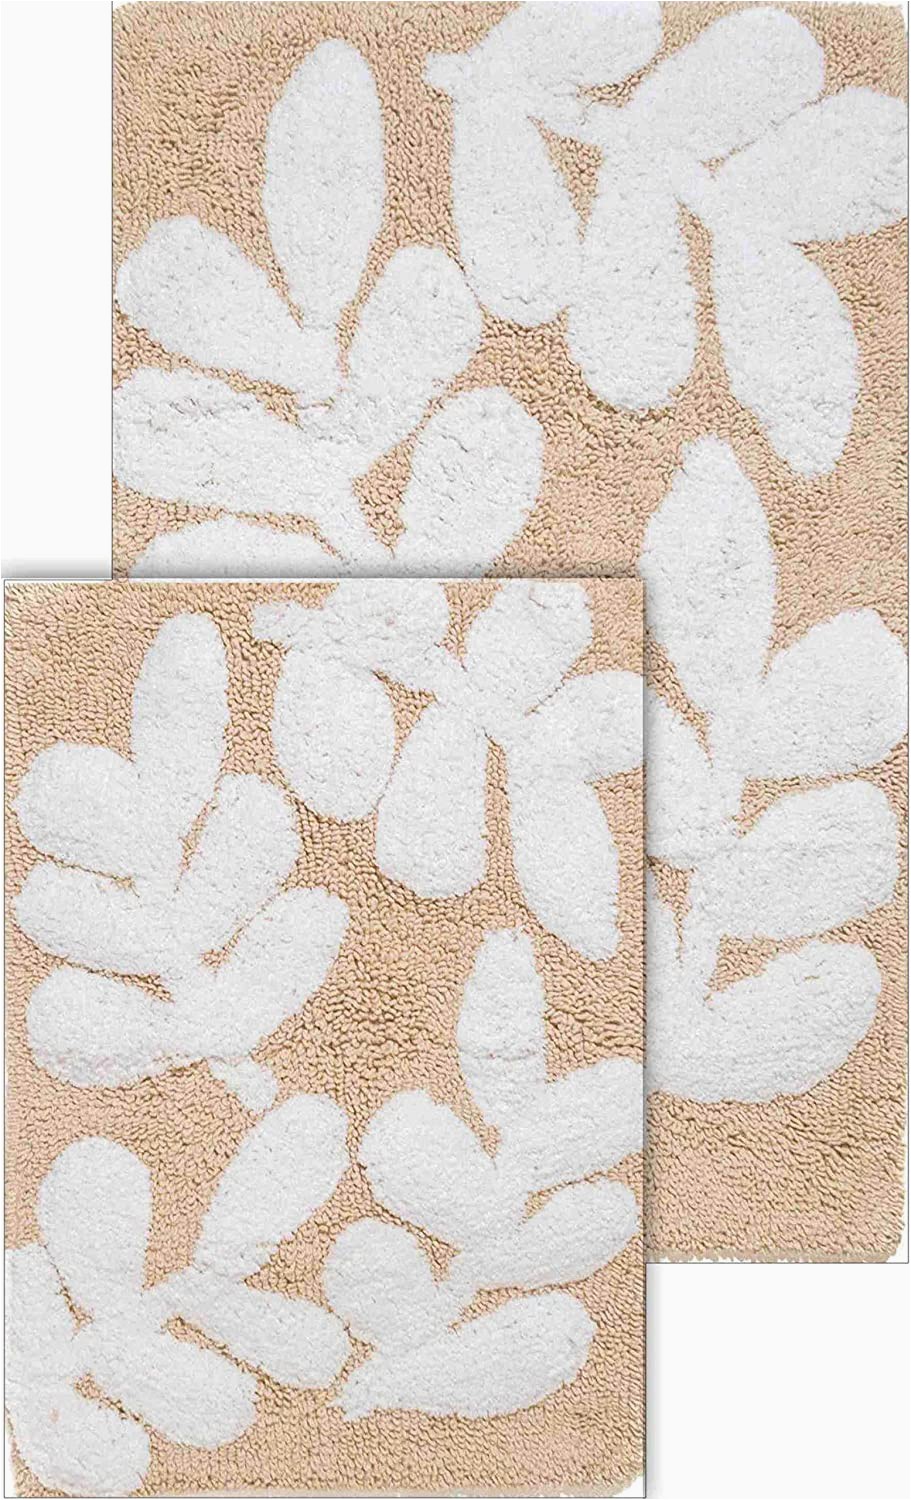 Brown and White Bathroom Rugs Chesapeake Merchandising 2 Piece Monte Carlo Bath Rug Set Taupe and White